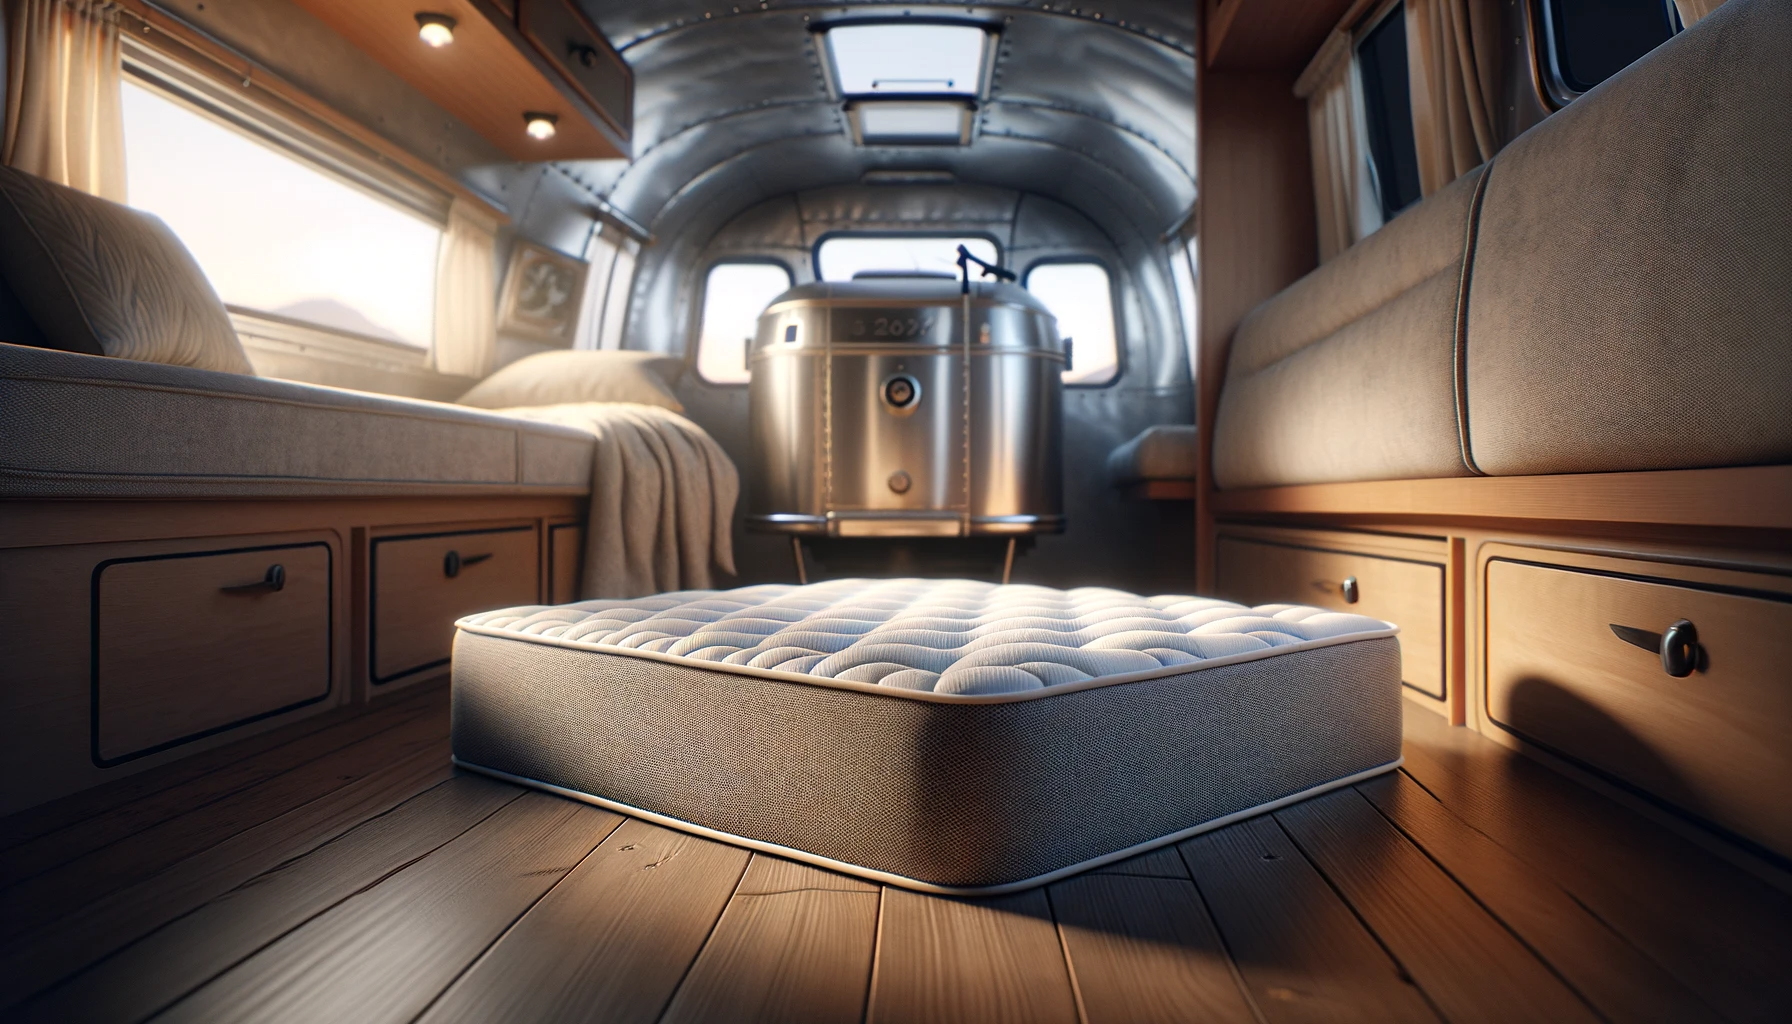 Here is the image showcasing a luxurious and comfortable replacement mattress, ideal for use in an Airstream caravan. The image focuses on the plush and inviting appearance of the mattress, emphasizing its quality and comfort for a superior travel experience